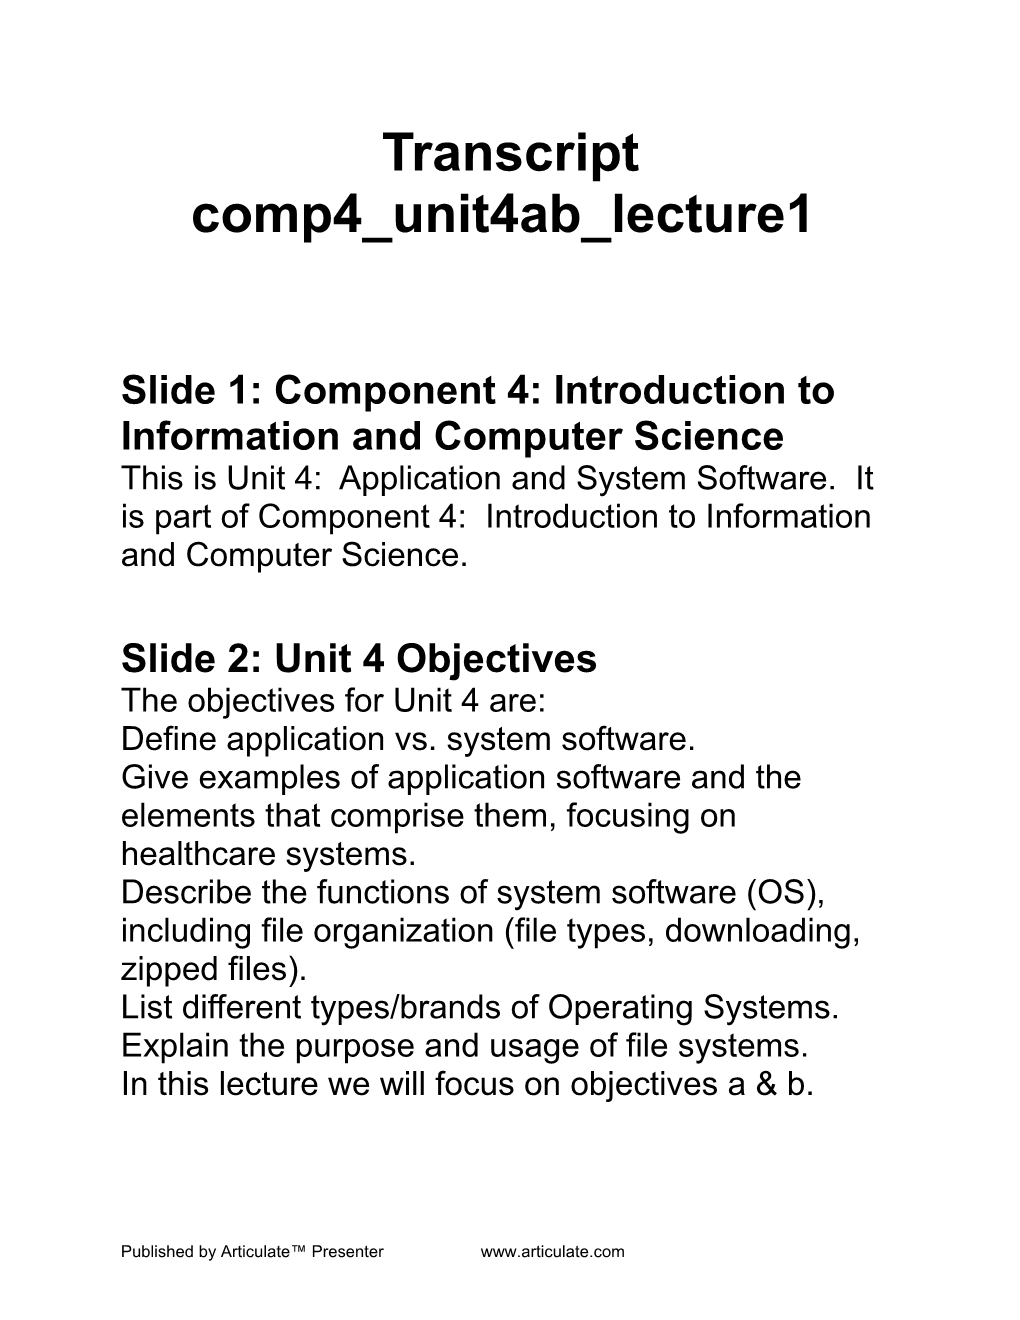 Slide 1: Component 4: Introduction to Information and Computer Science